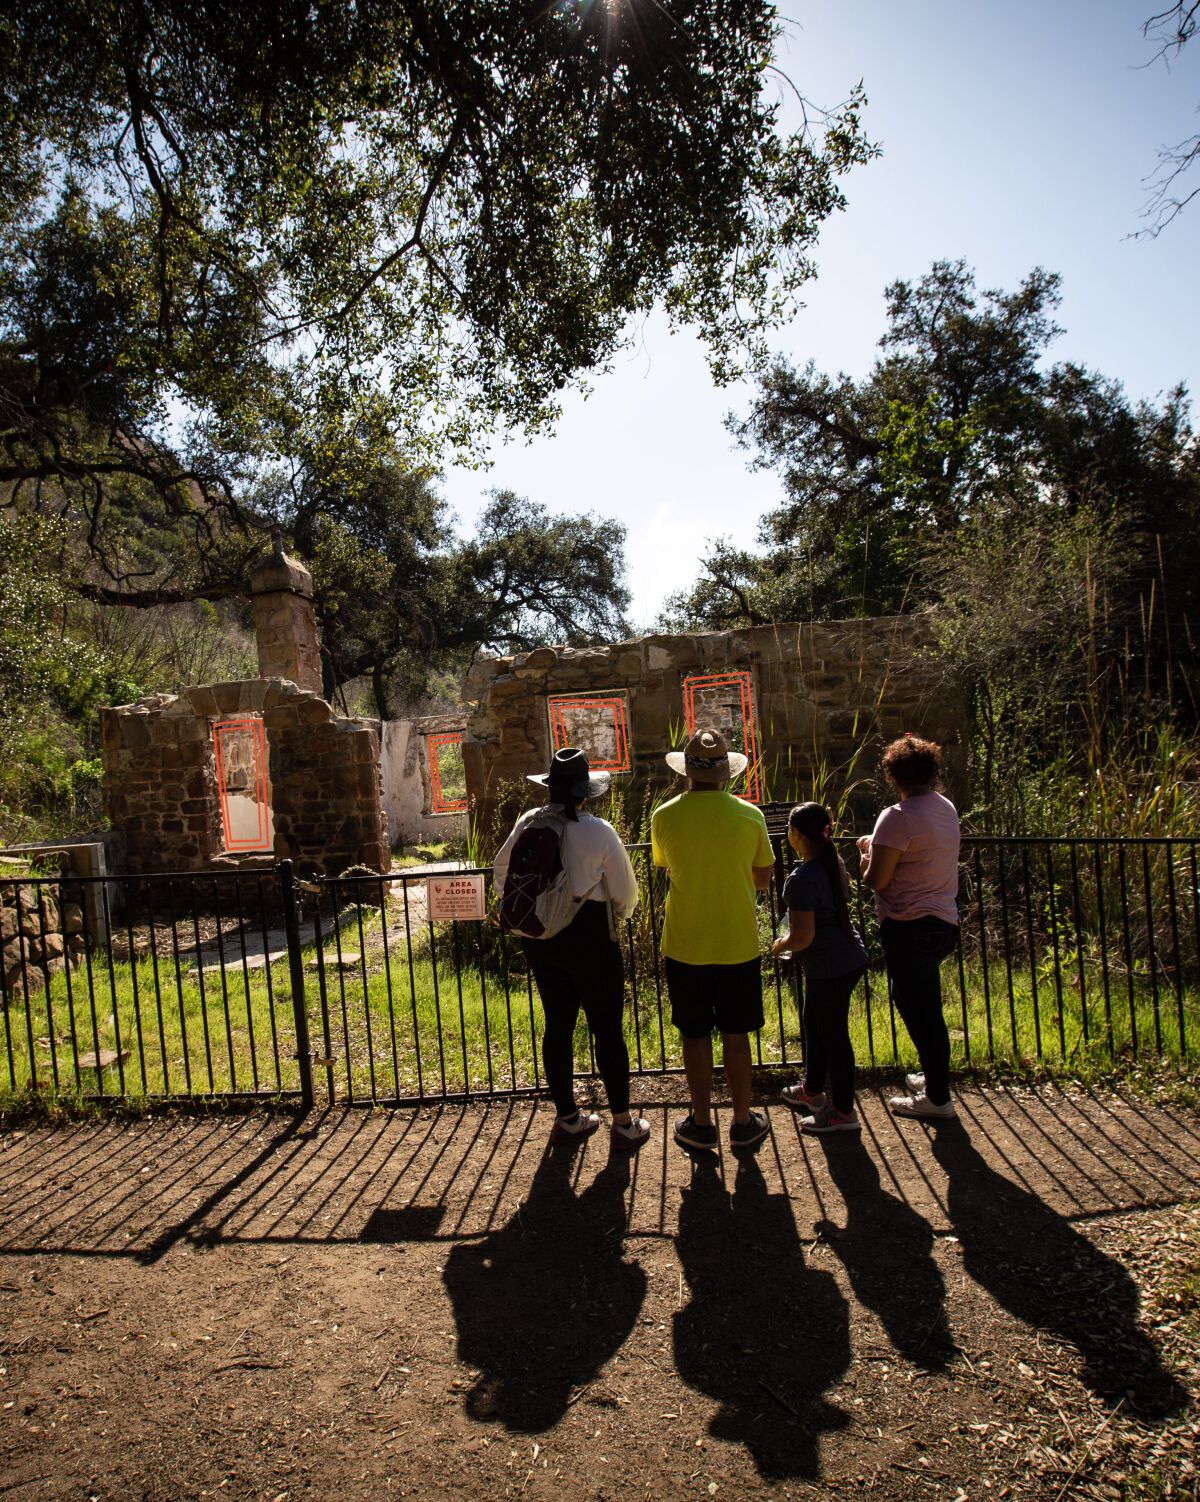 Lorina Haro and her children visit the Keller House on the Solstice Canyon hike.